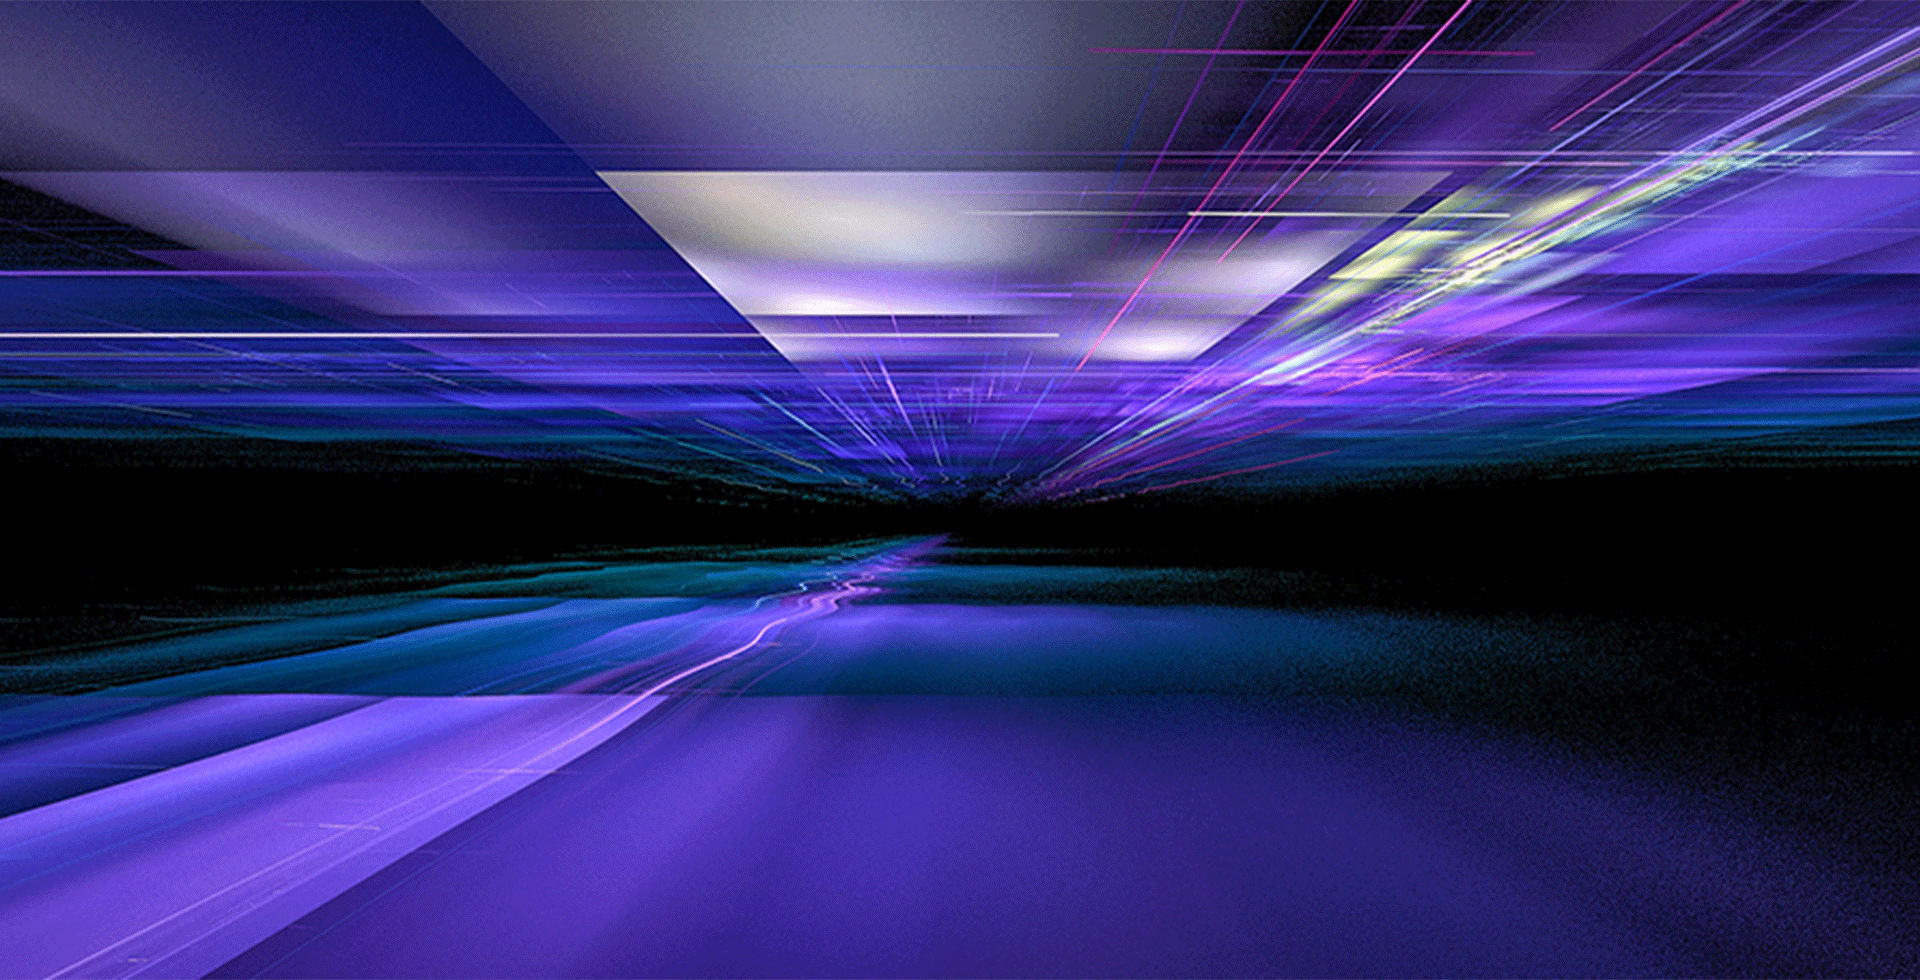 a mirrored image of glow purple neon light trail explosion, Light flare beam effect